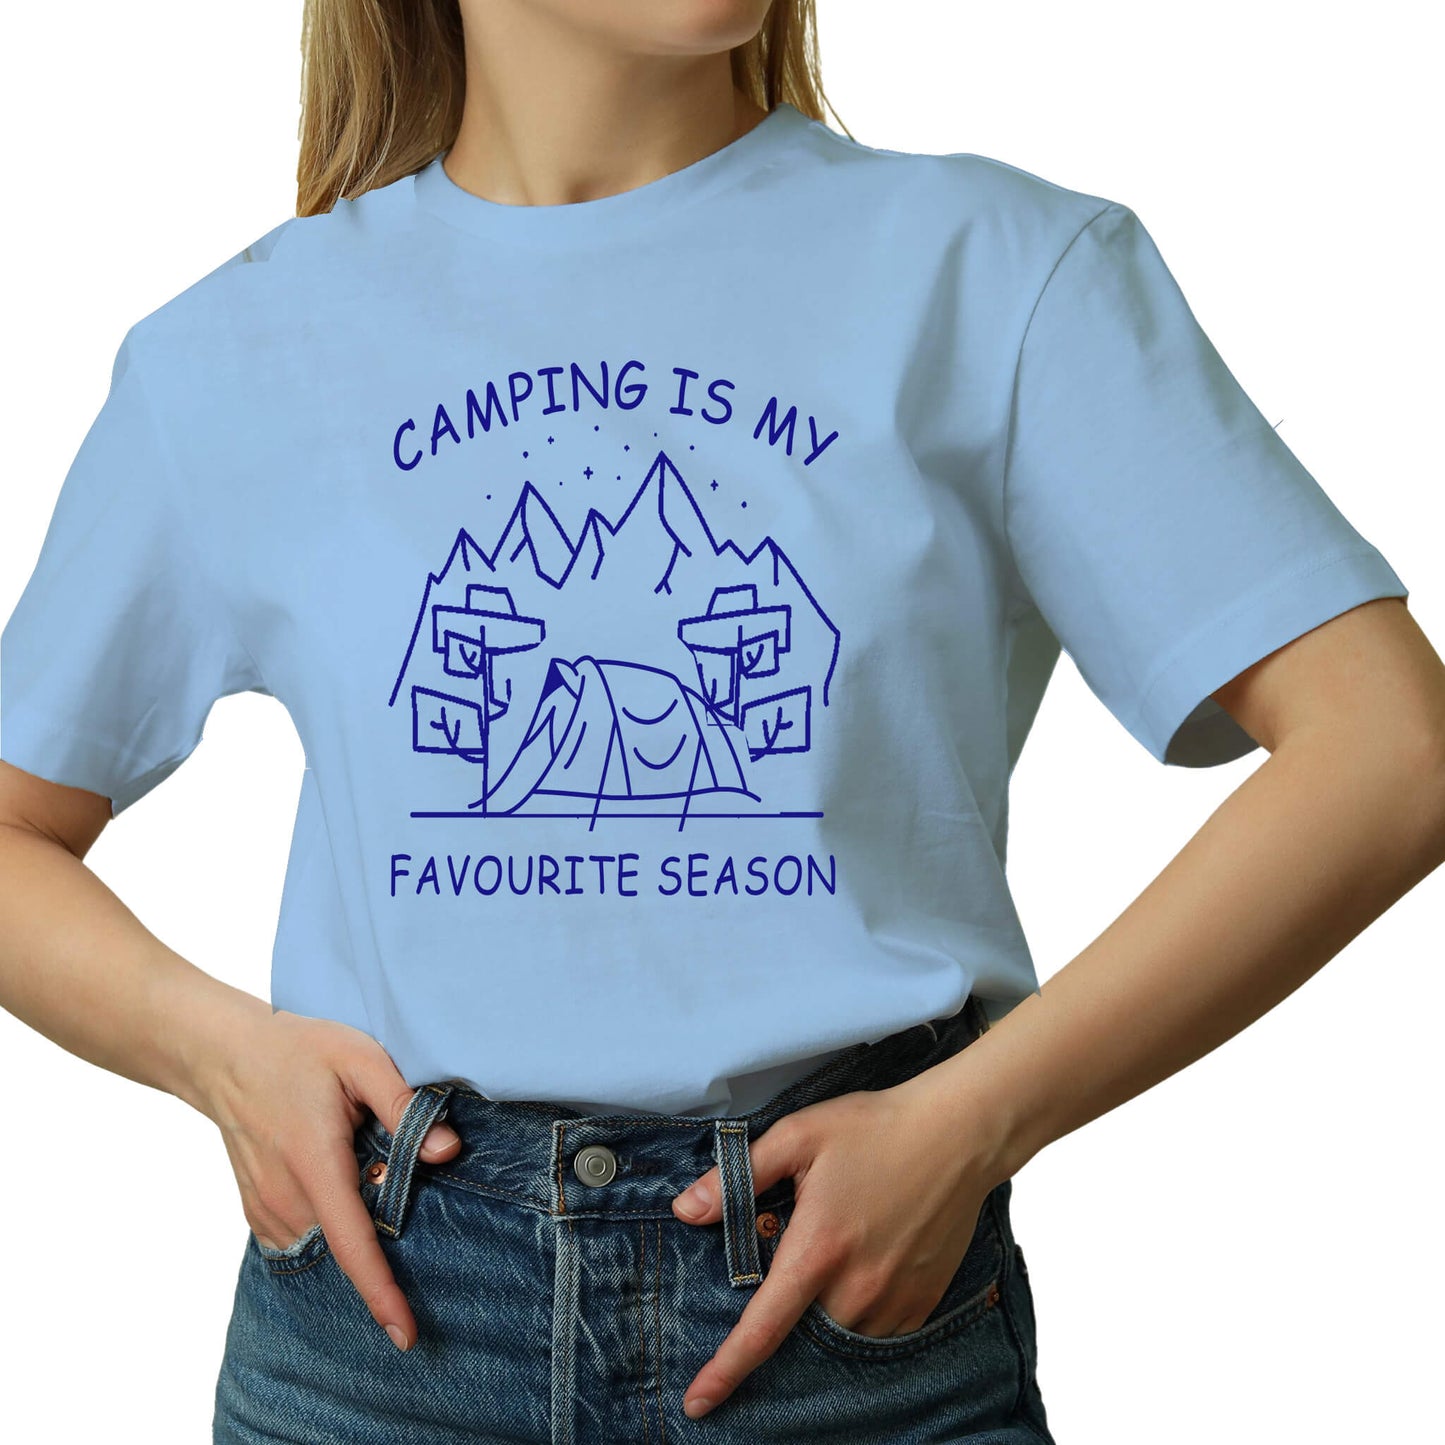  "Blue Graphic tee with an illustration of a tent, surrounded by nature. Text reads: 'Camping is my favorite season.' Celebrate the great outdoors!"